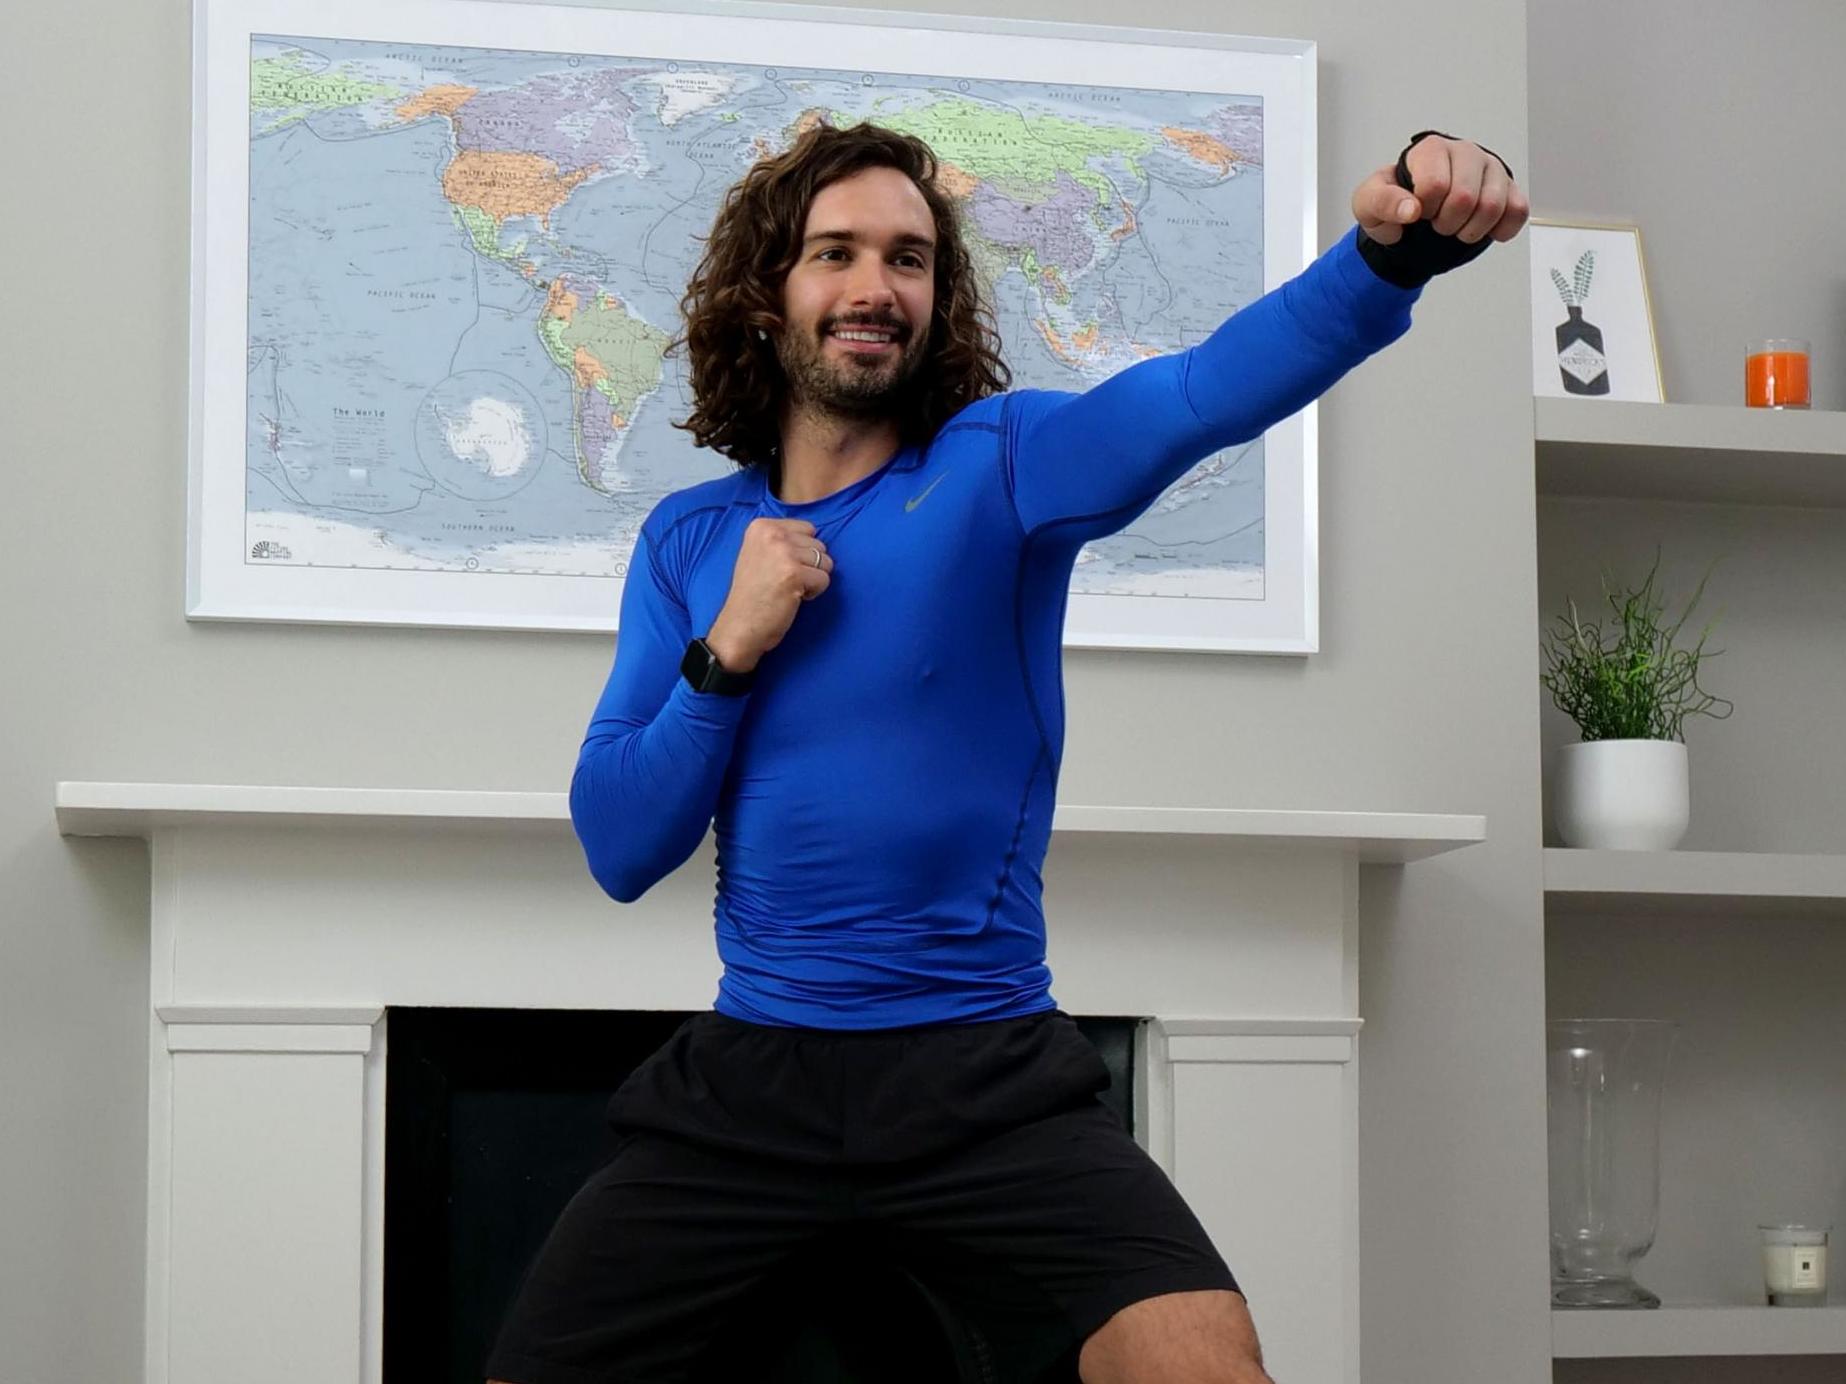 Related video: Thousands of children join Joe Wicks for live PE lesson following UK school closures